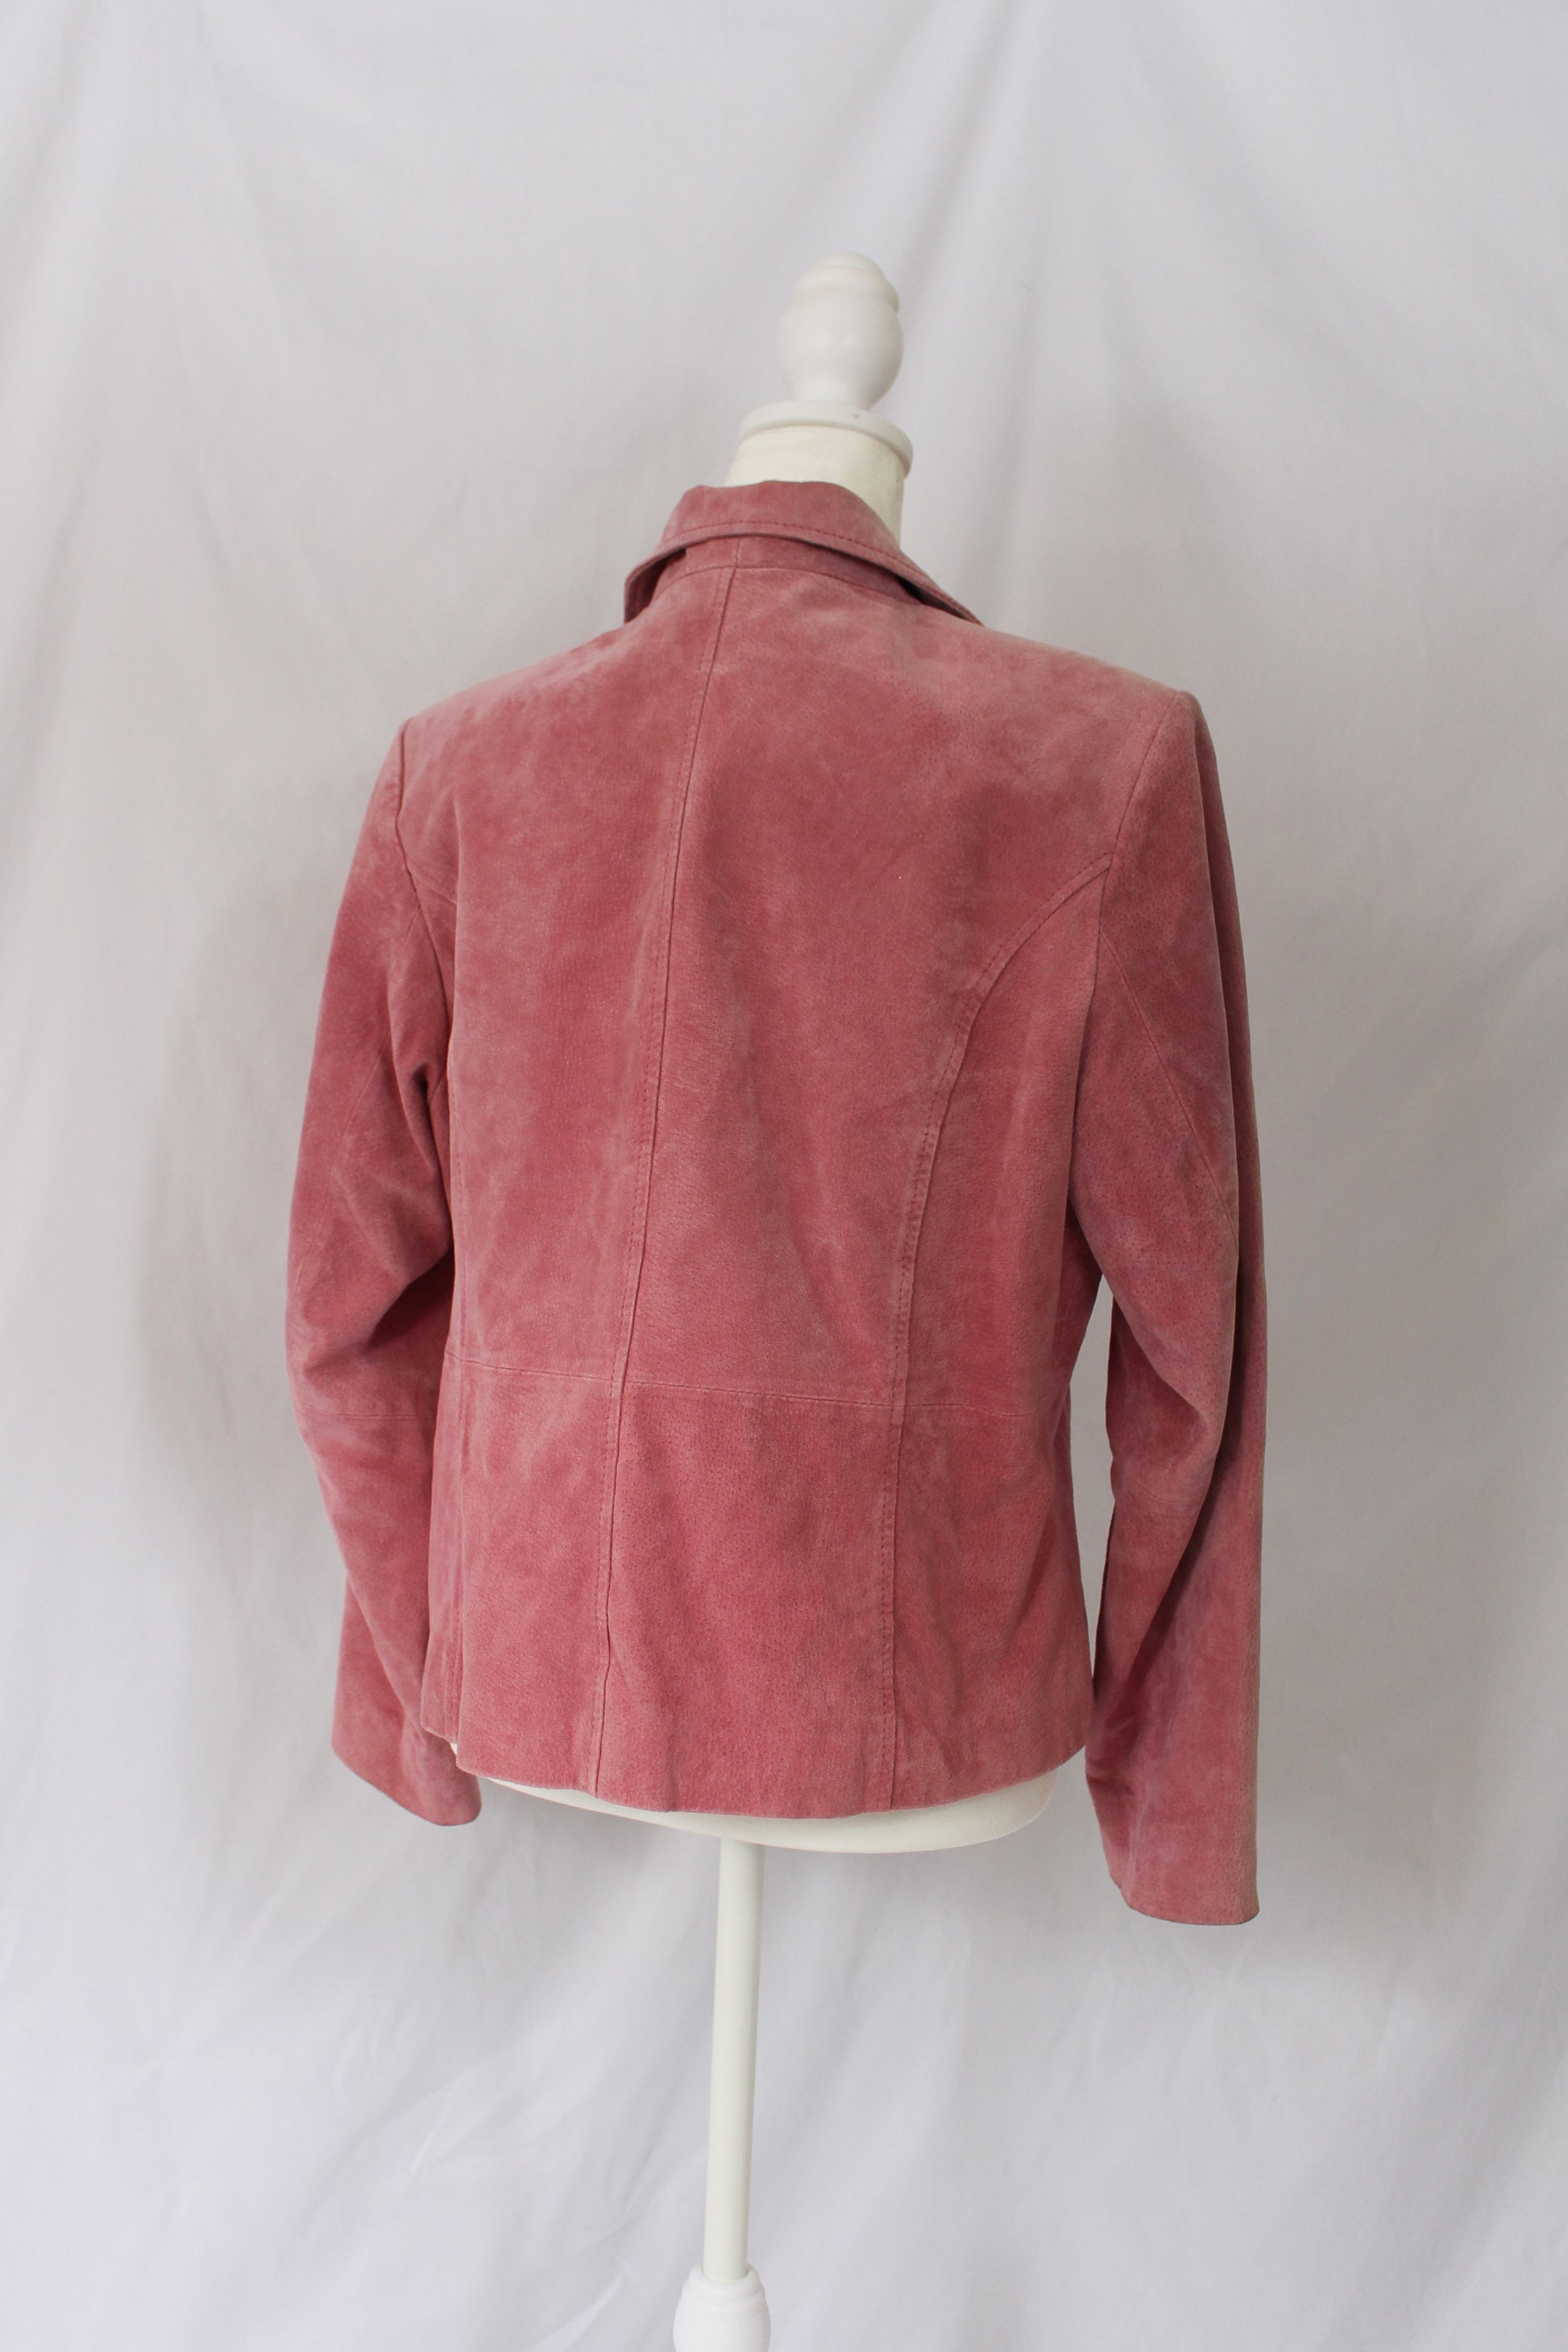 suede pink leather blazer petite large